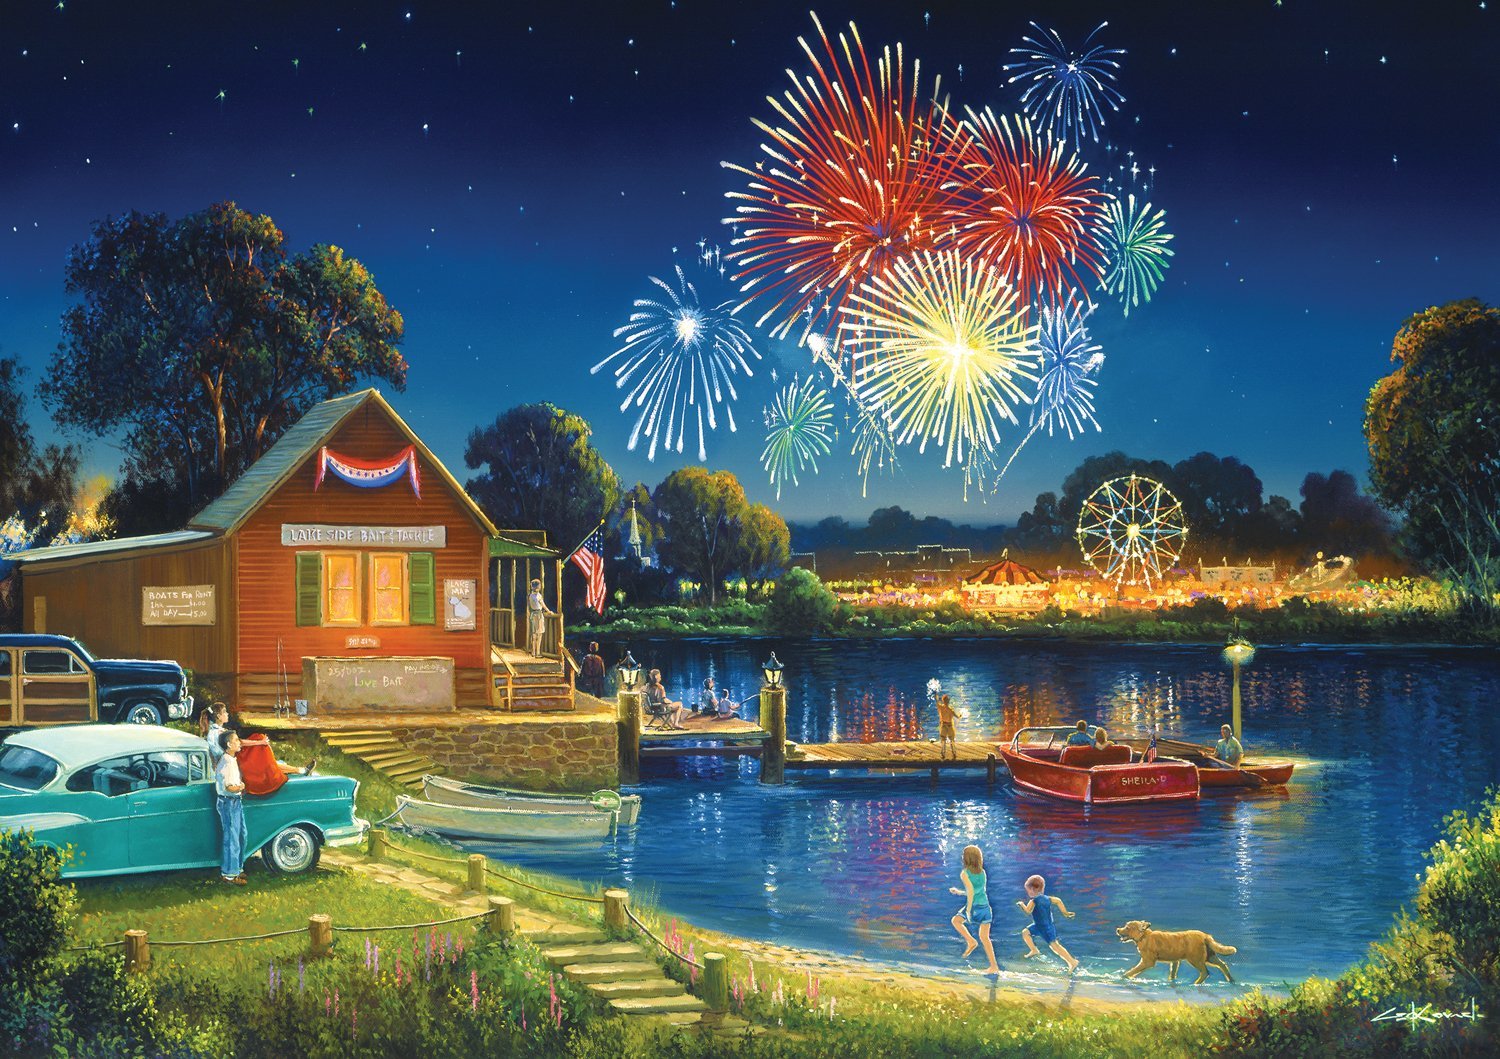 Follow Your Heart Lakes & Rivers Jigsaw Puzzle By Buffalo Games